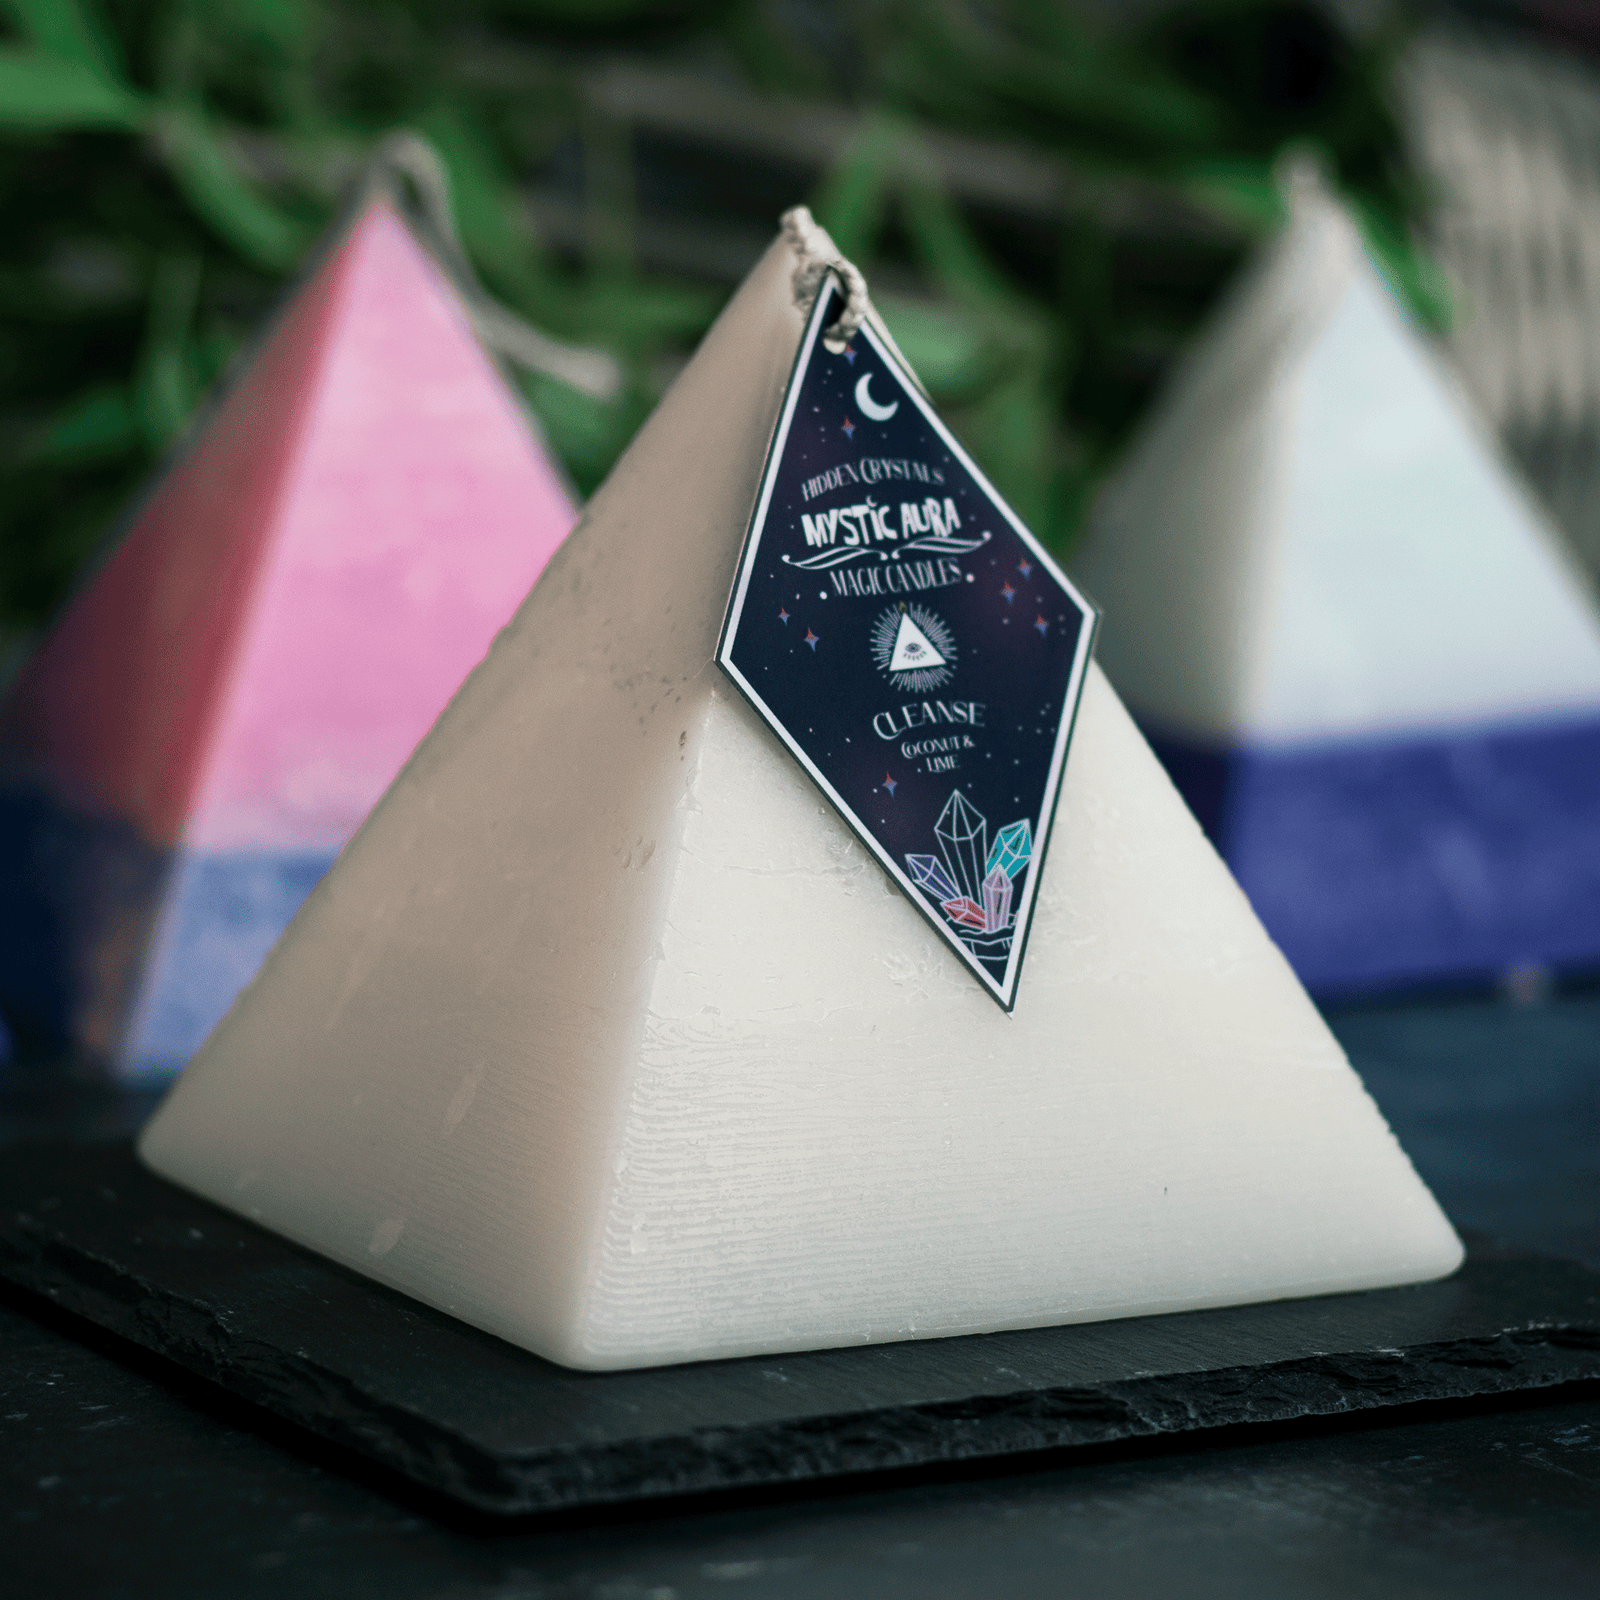 Cleanse Spell Pyramid Candle